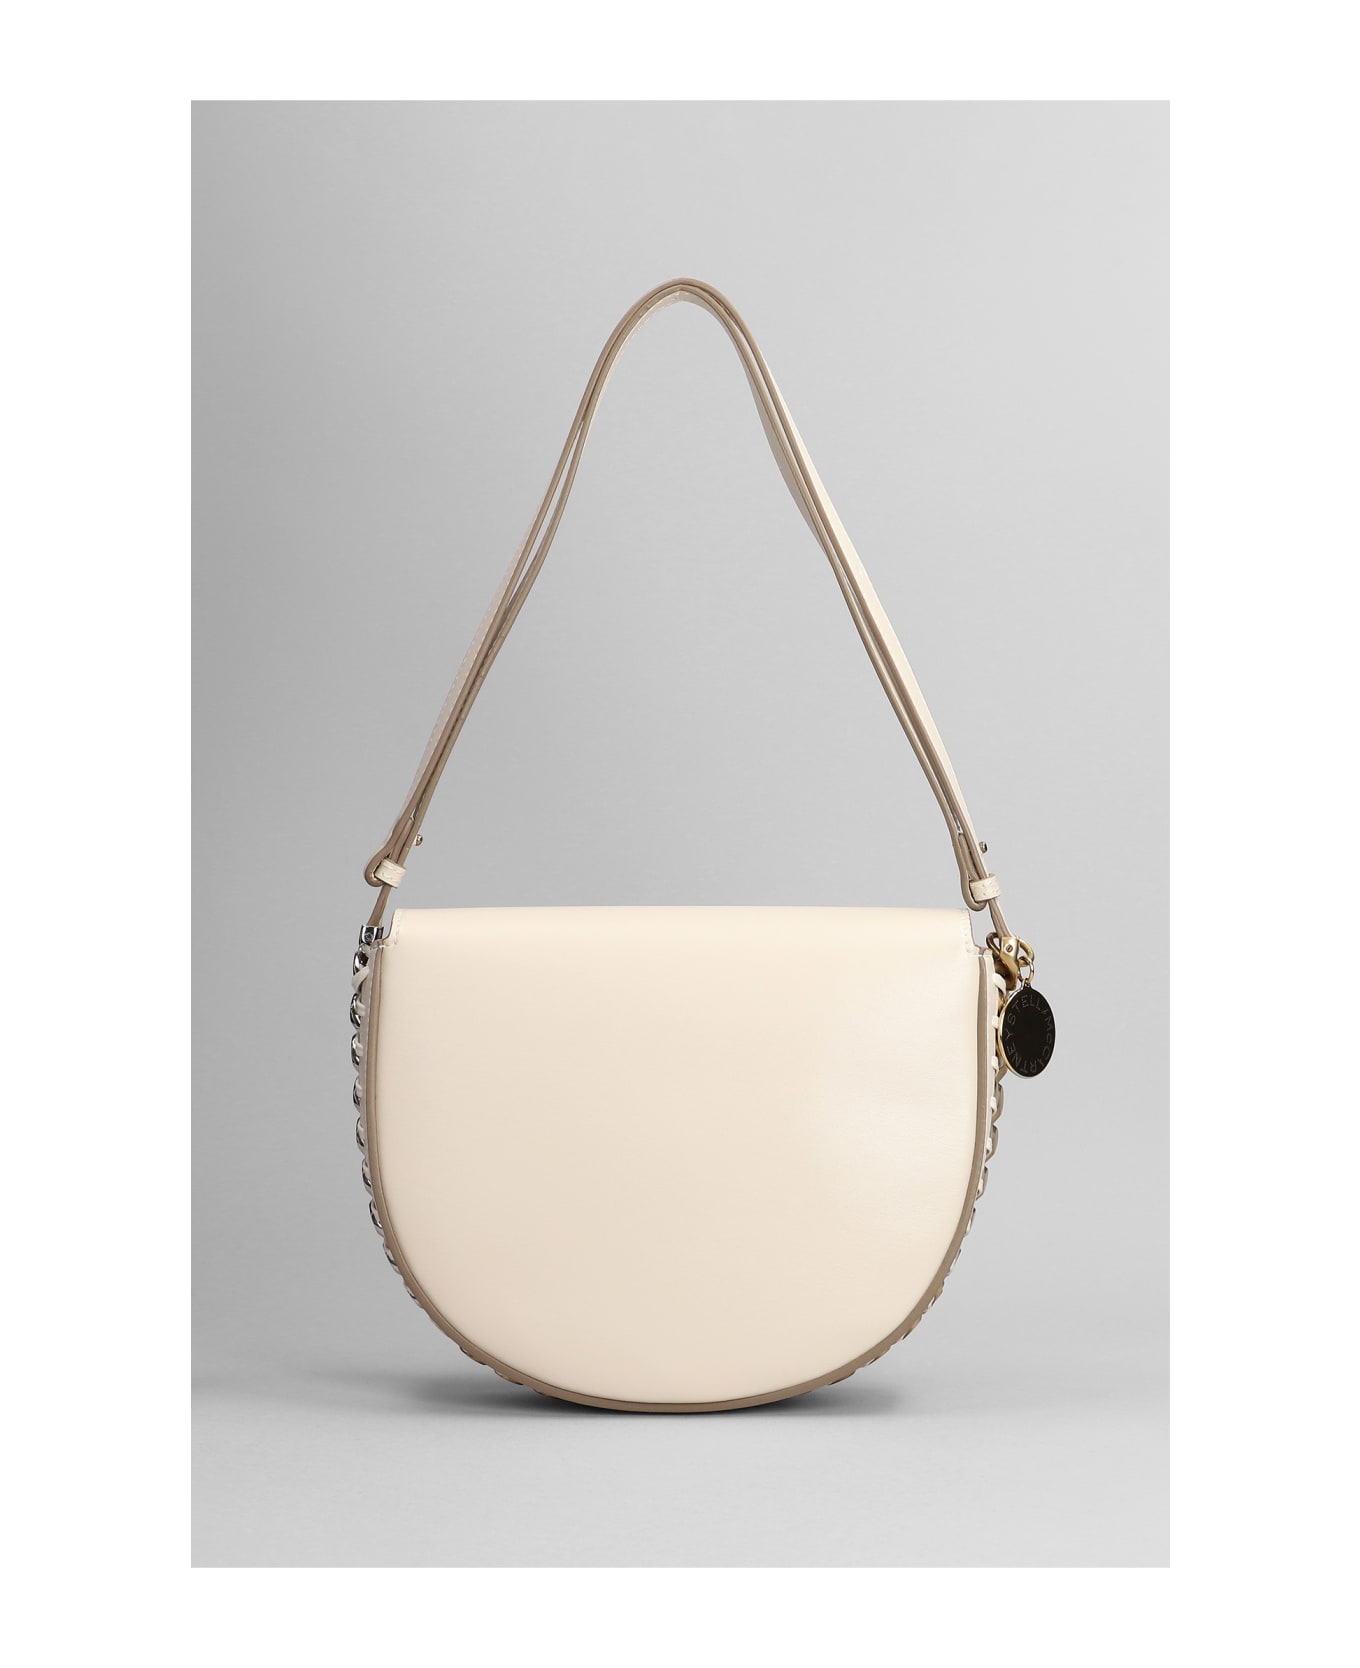 Stella McCartney Shoulder Bag In White Faux Leather - white